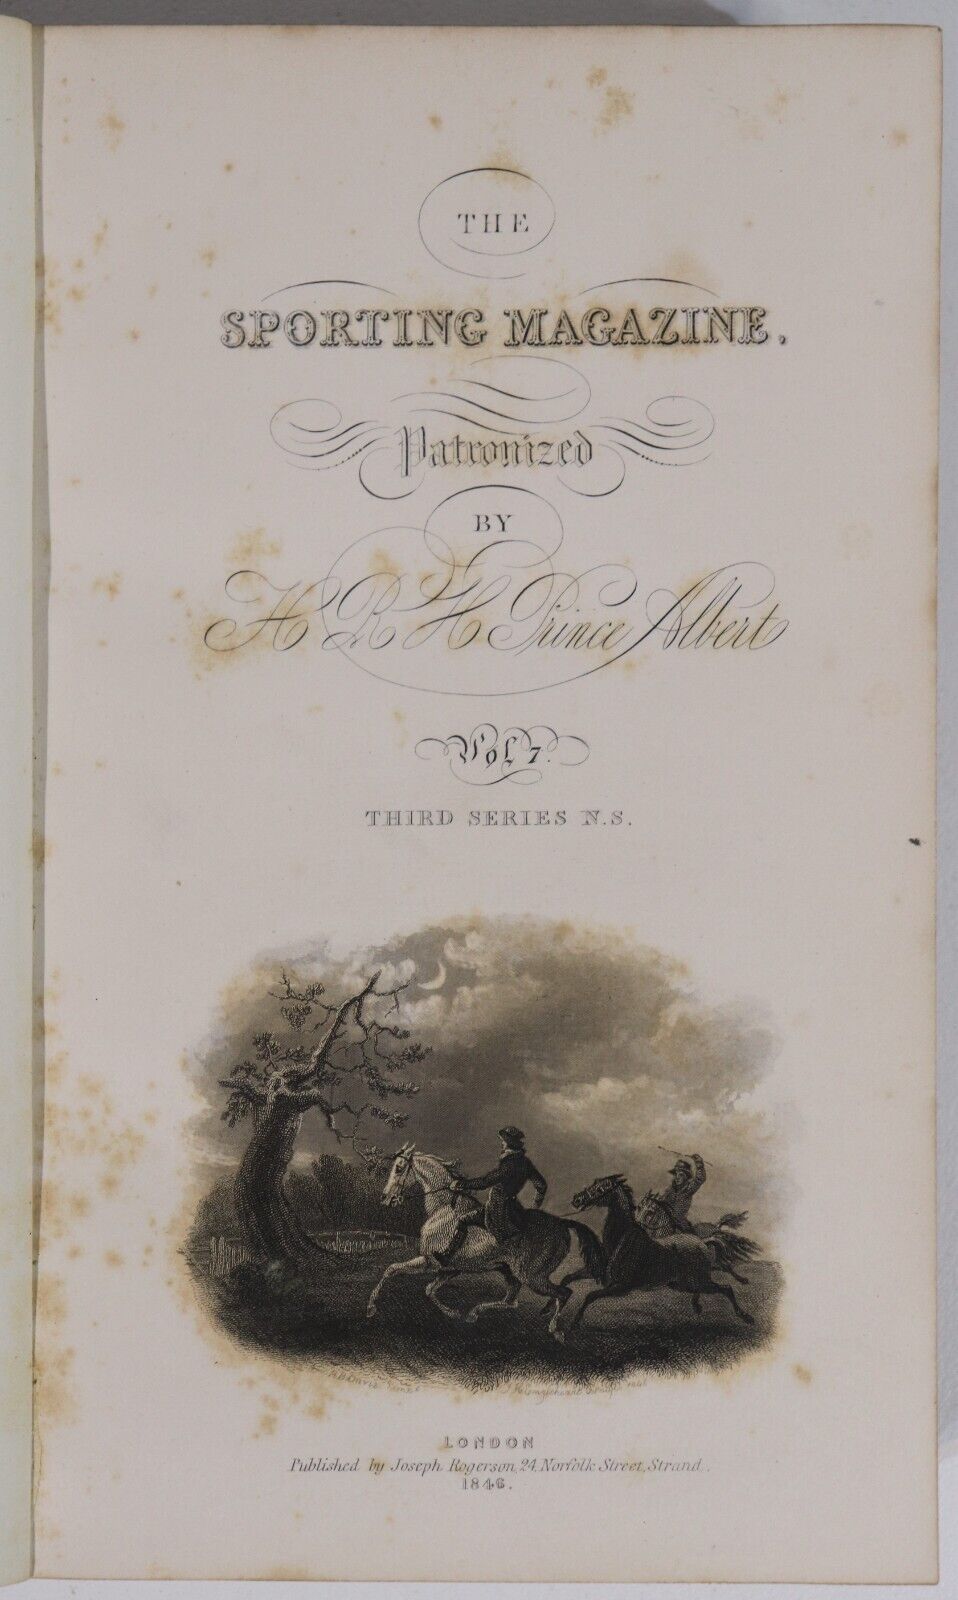 The Sporting Magazine - 1846 - Antiquarian Sport History Book